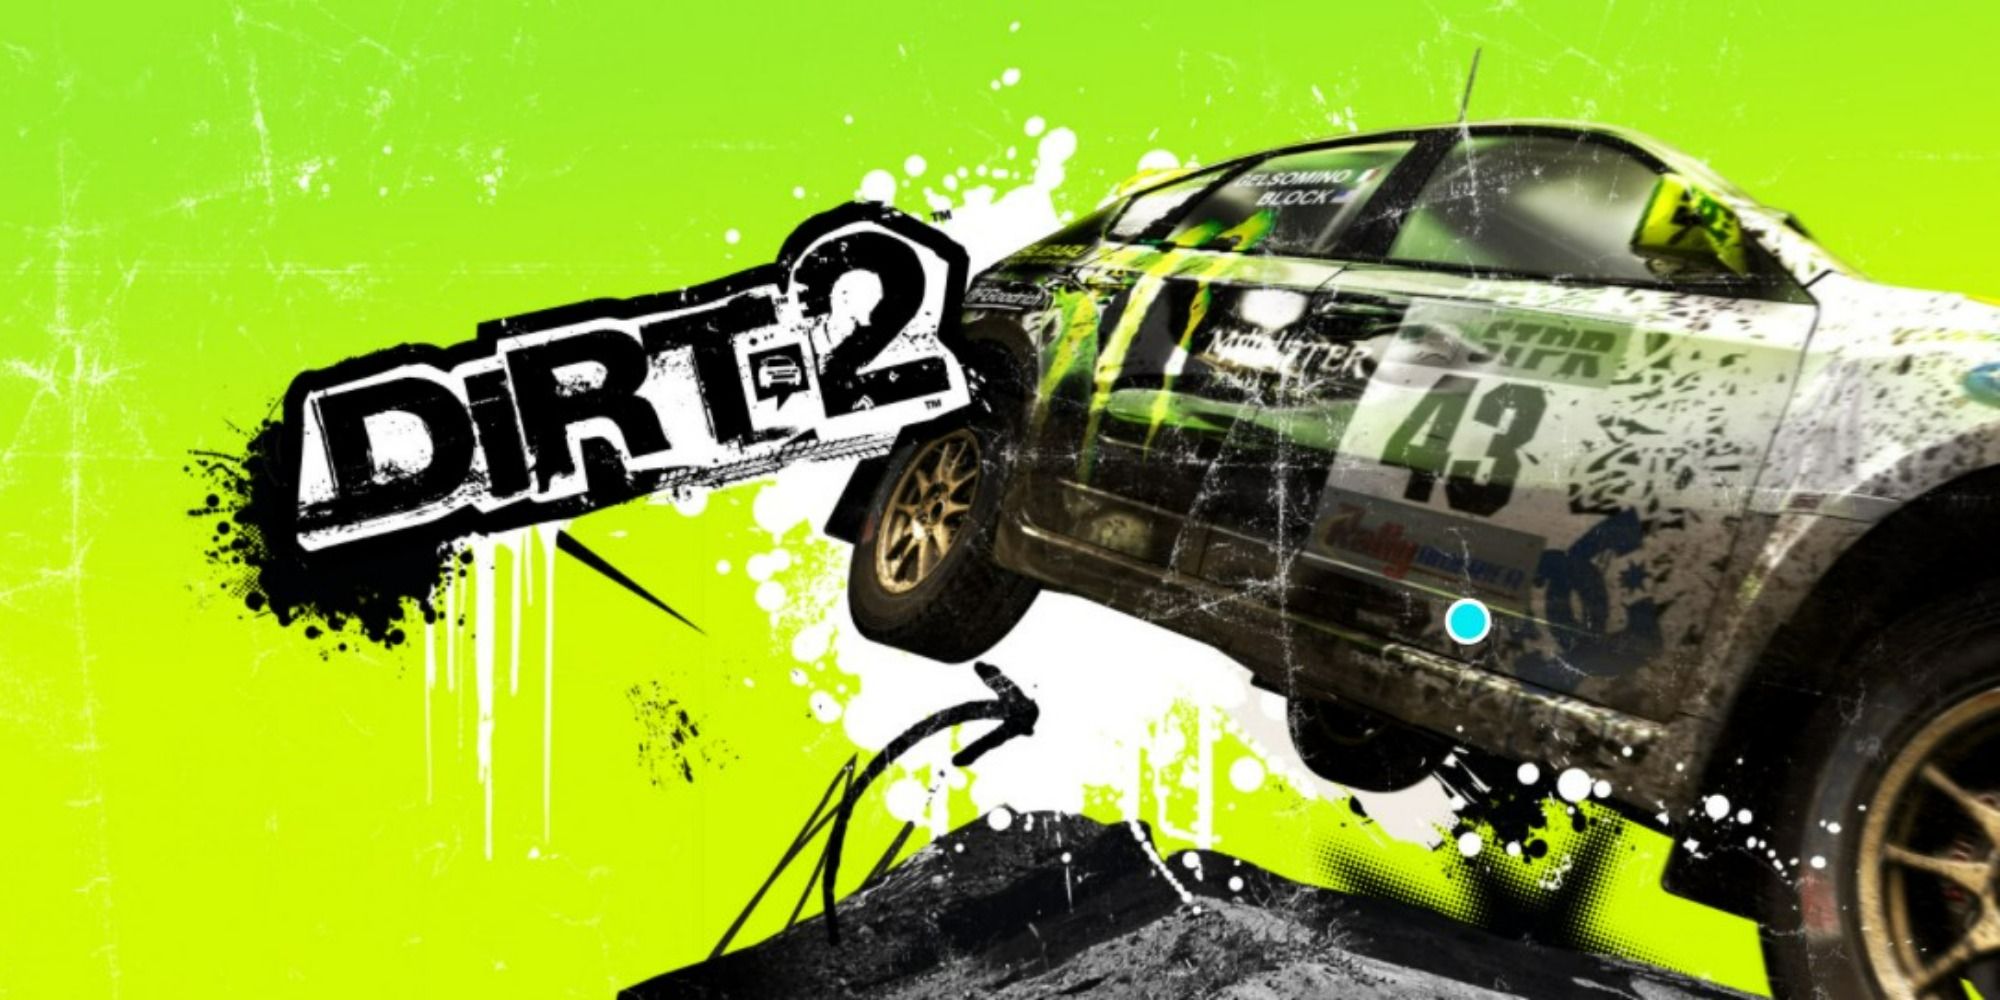 yellow green dirt 2 promo art with rally car